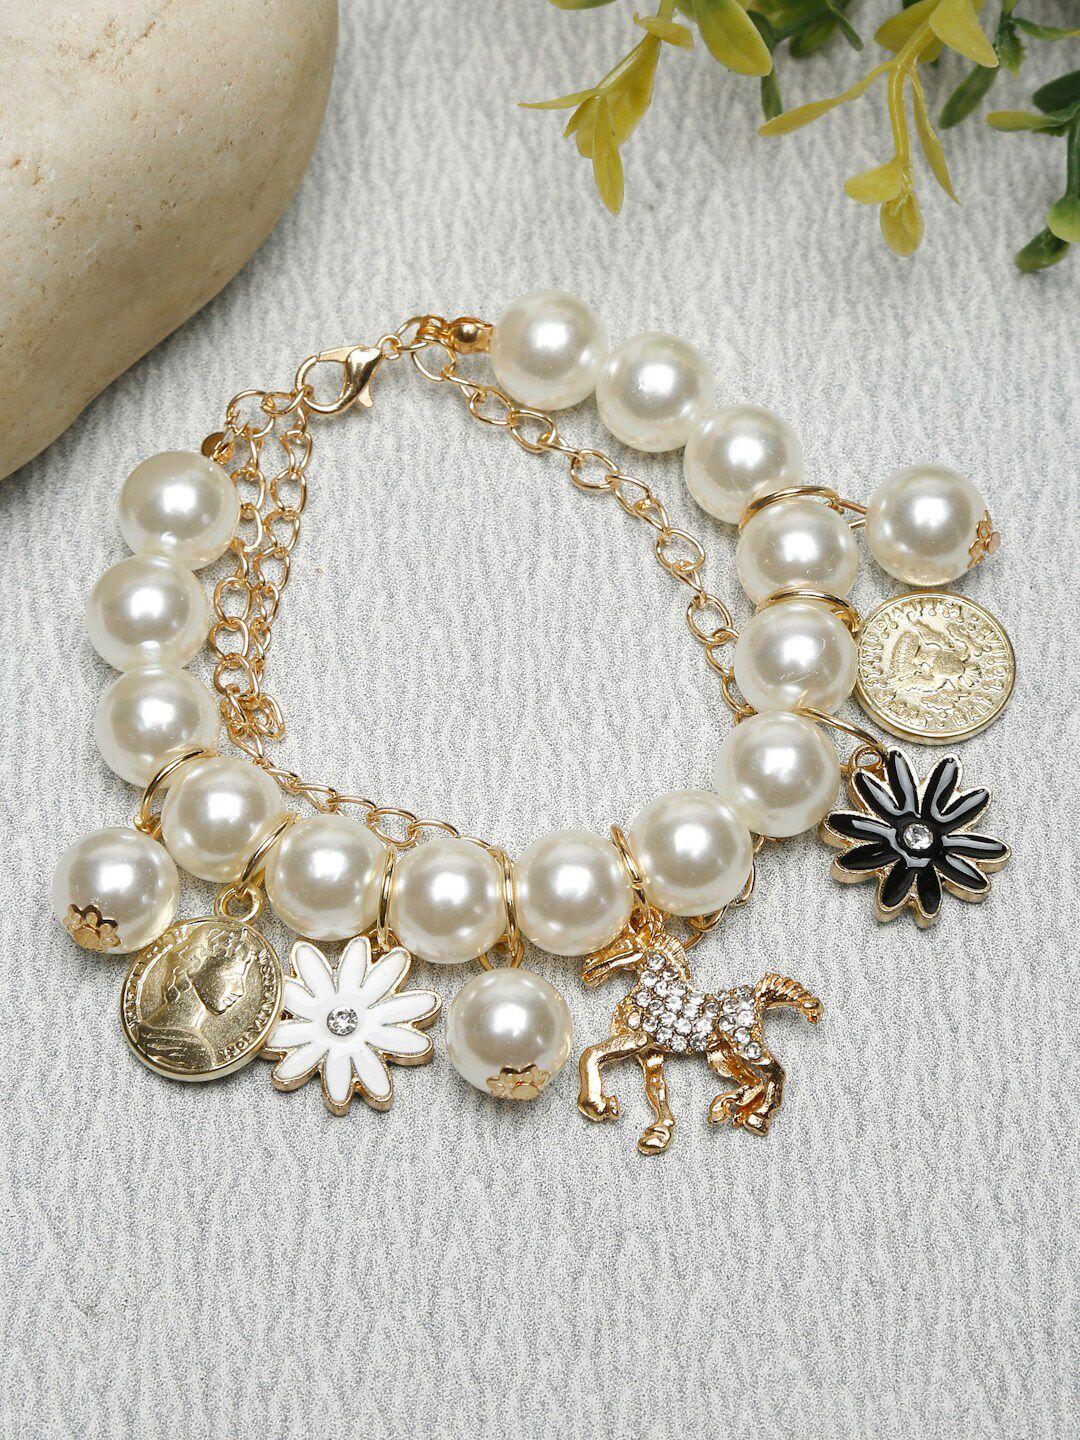 youbella women white & gold-toned gold-plated charm bracelet